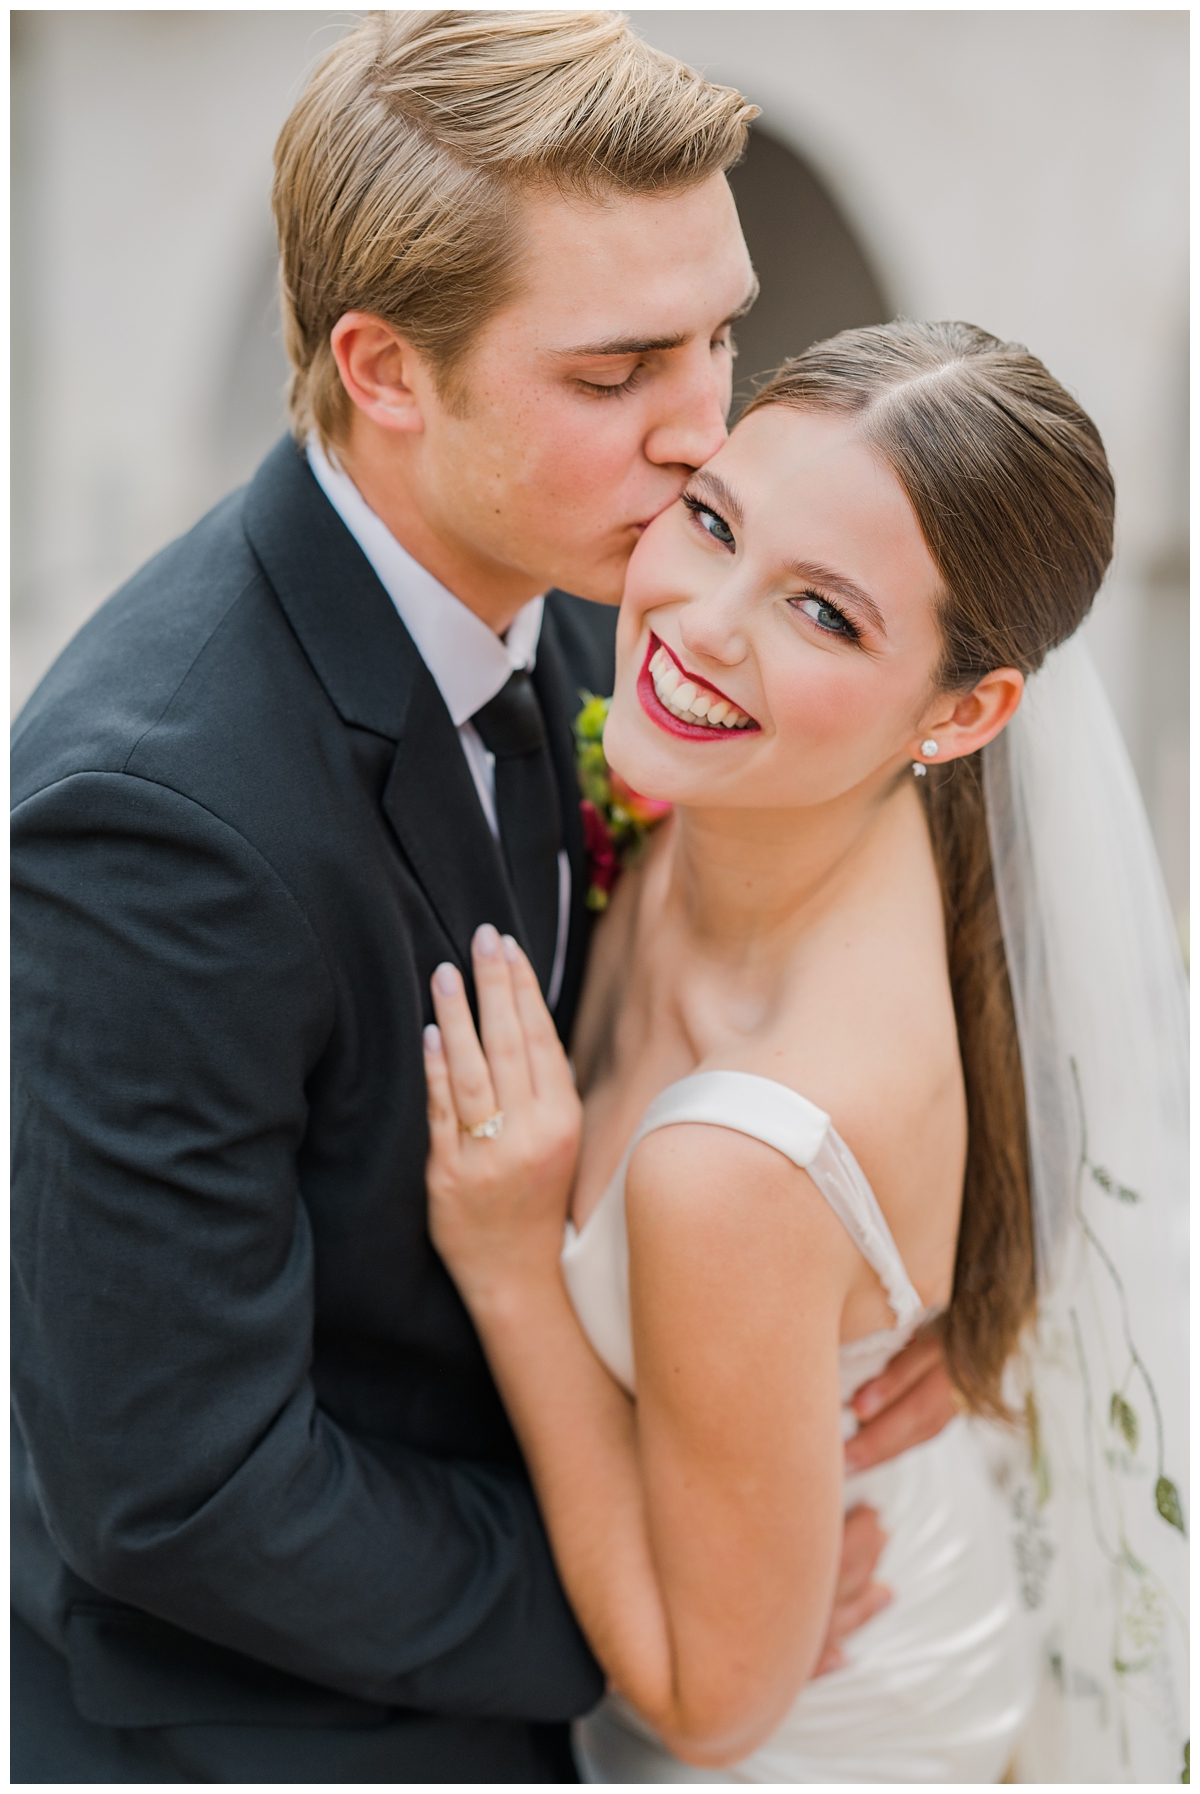 Sunny Hair and Makeup bridal services for Austin Texas weddings